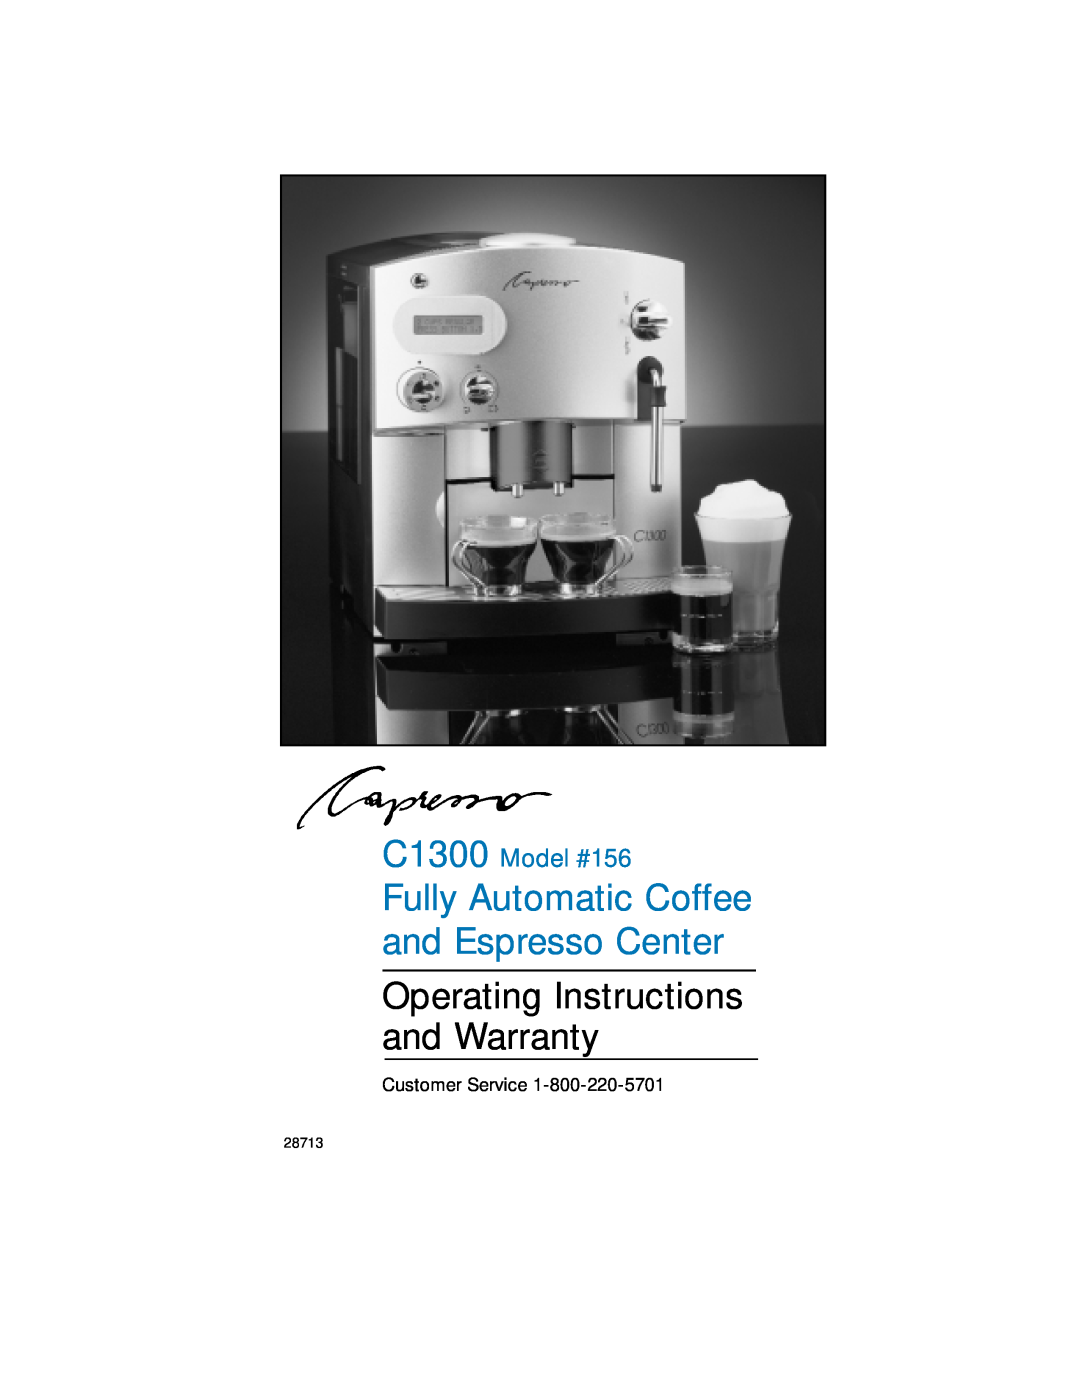 Capresso warranty Fully Automatic Coffee and Espresso Center, Operating Instructions and Warranty, C1300 Model #156 